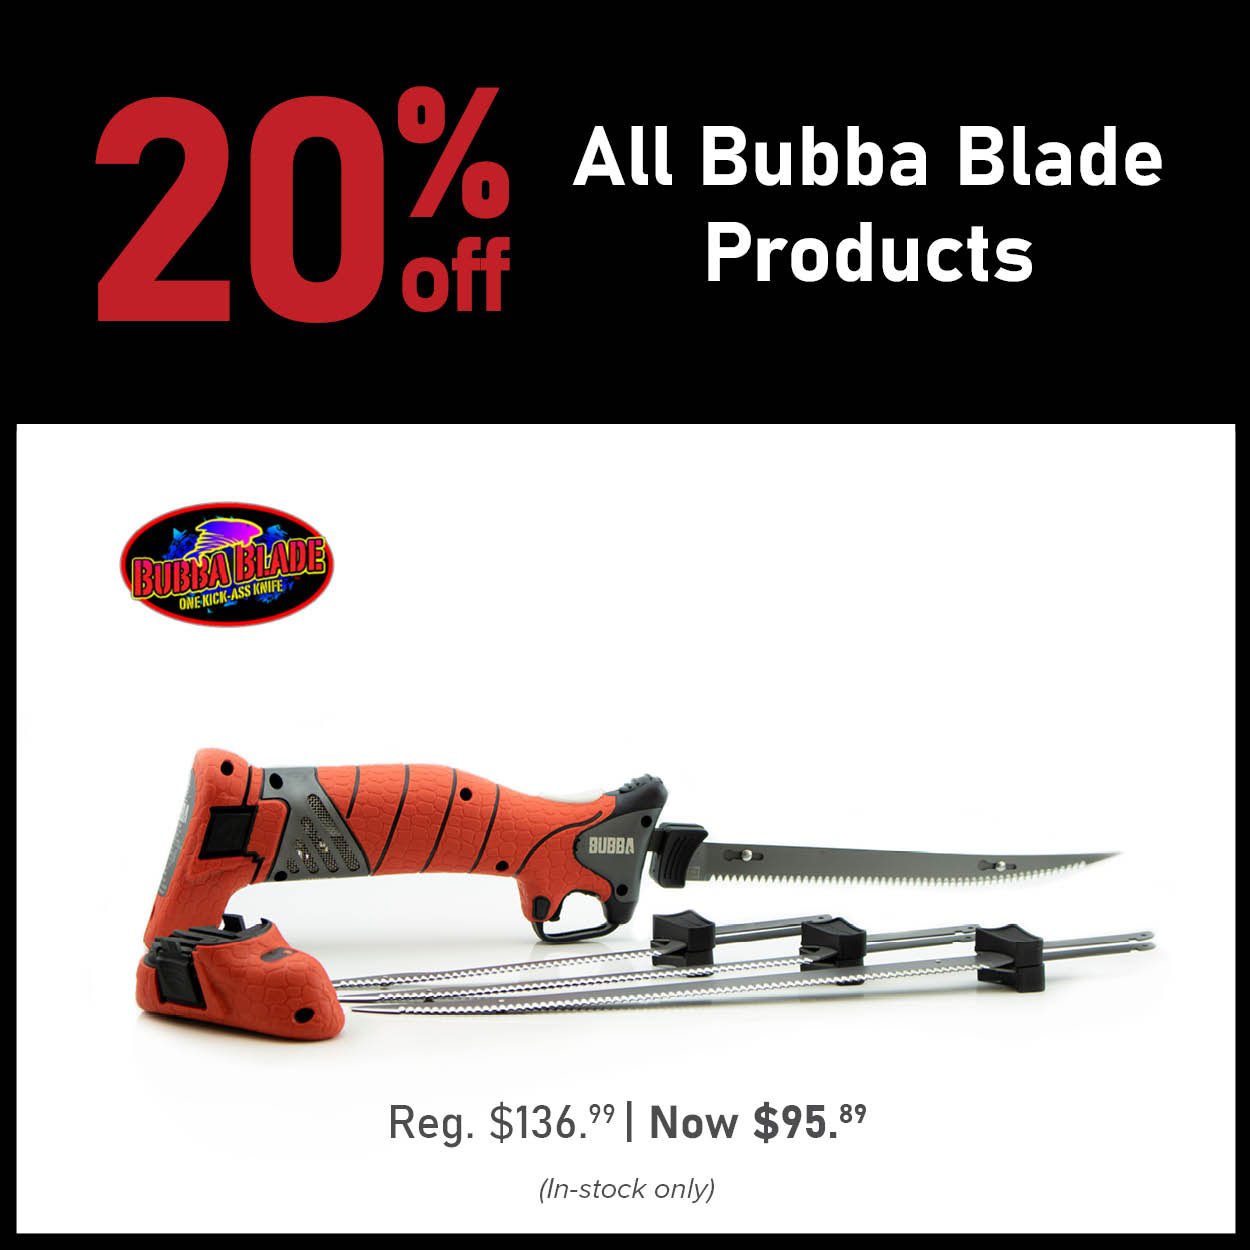 20% Off All Bubba Blade Products (In-stock only)